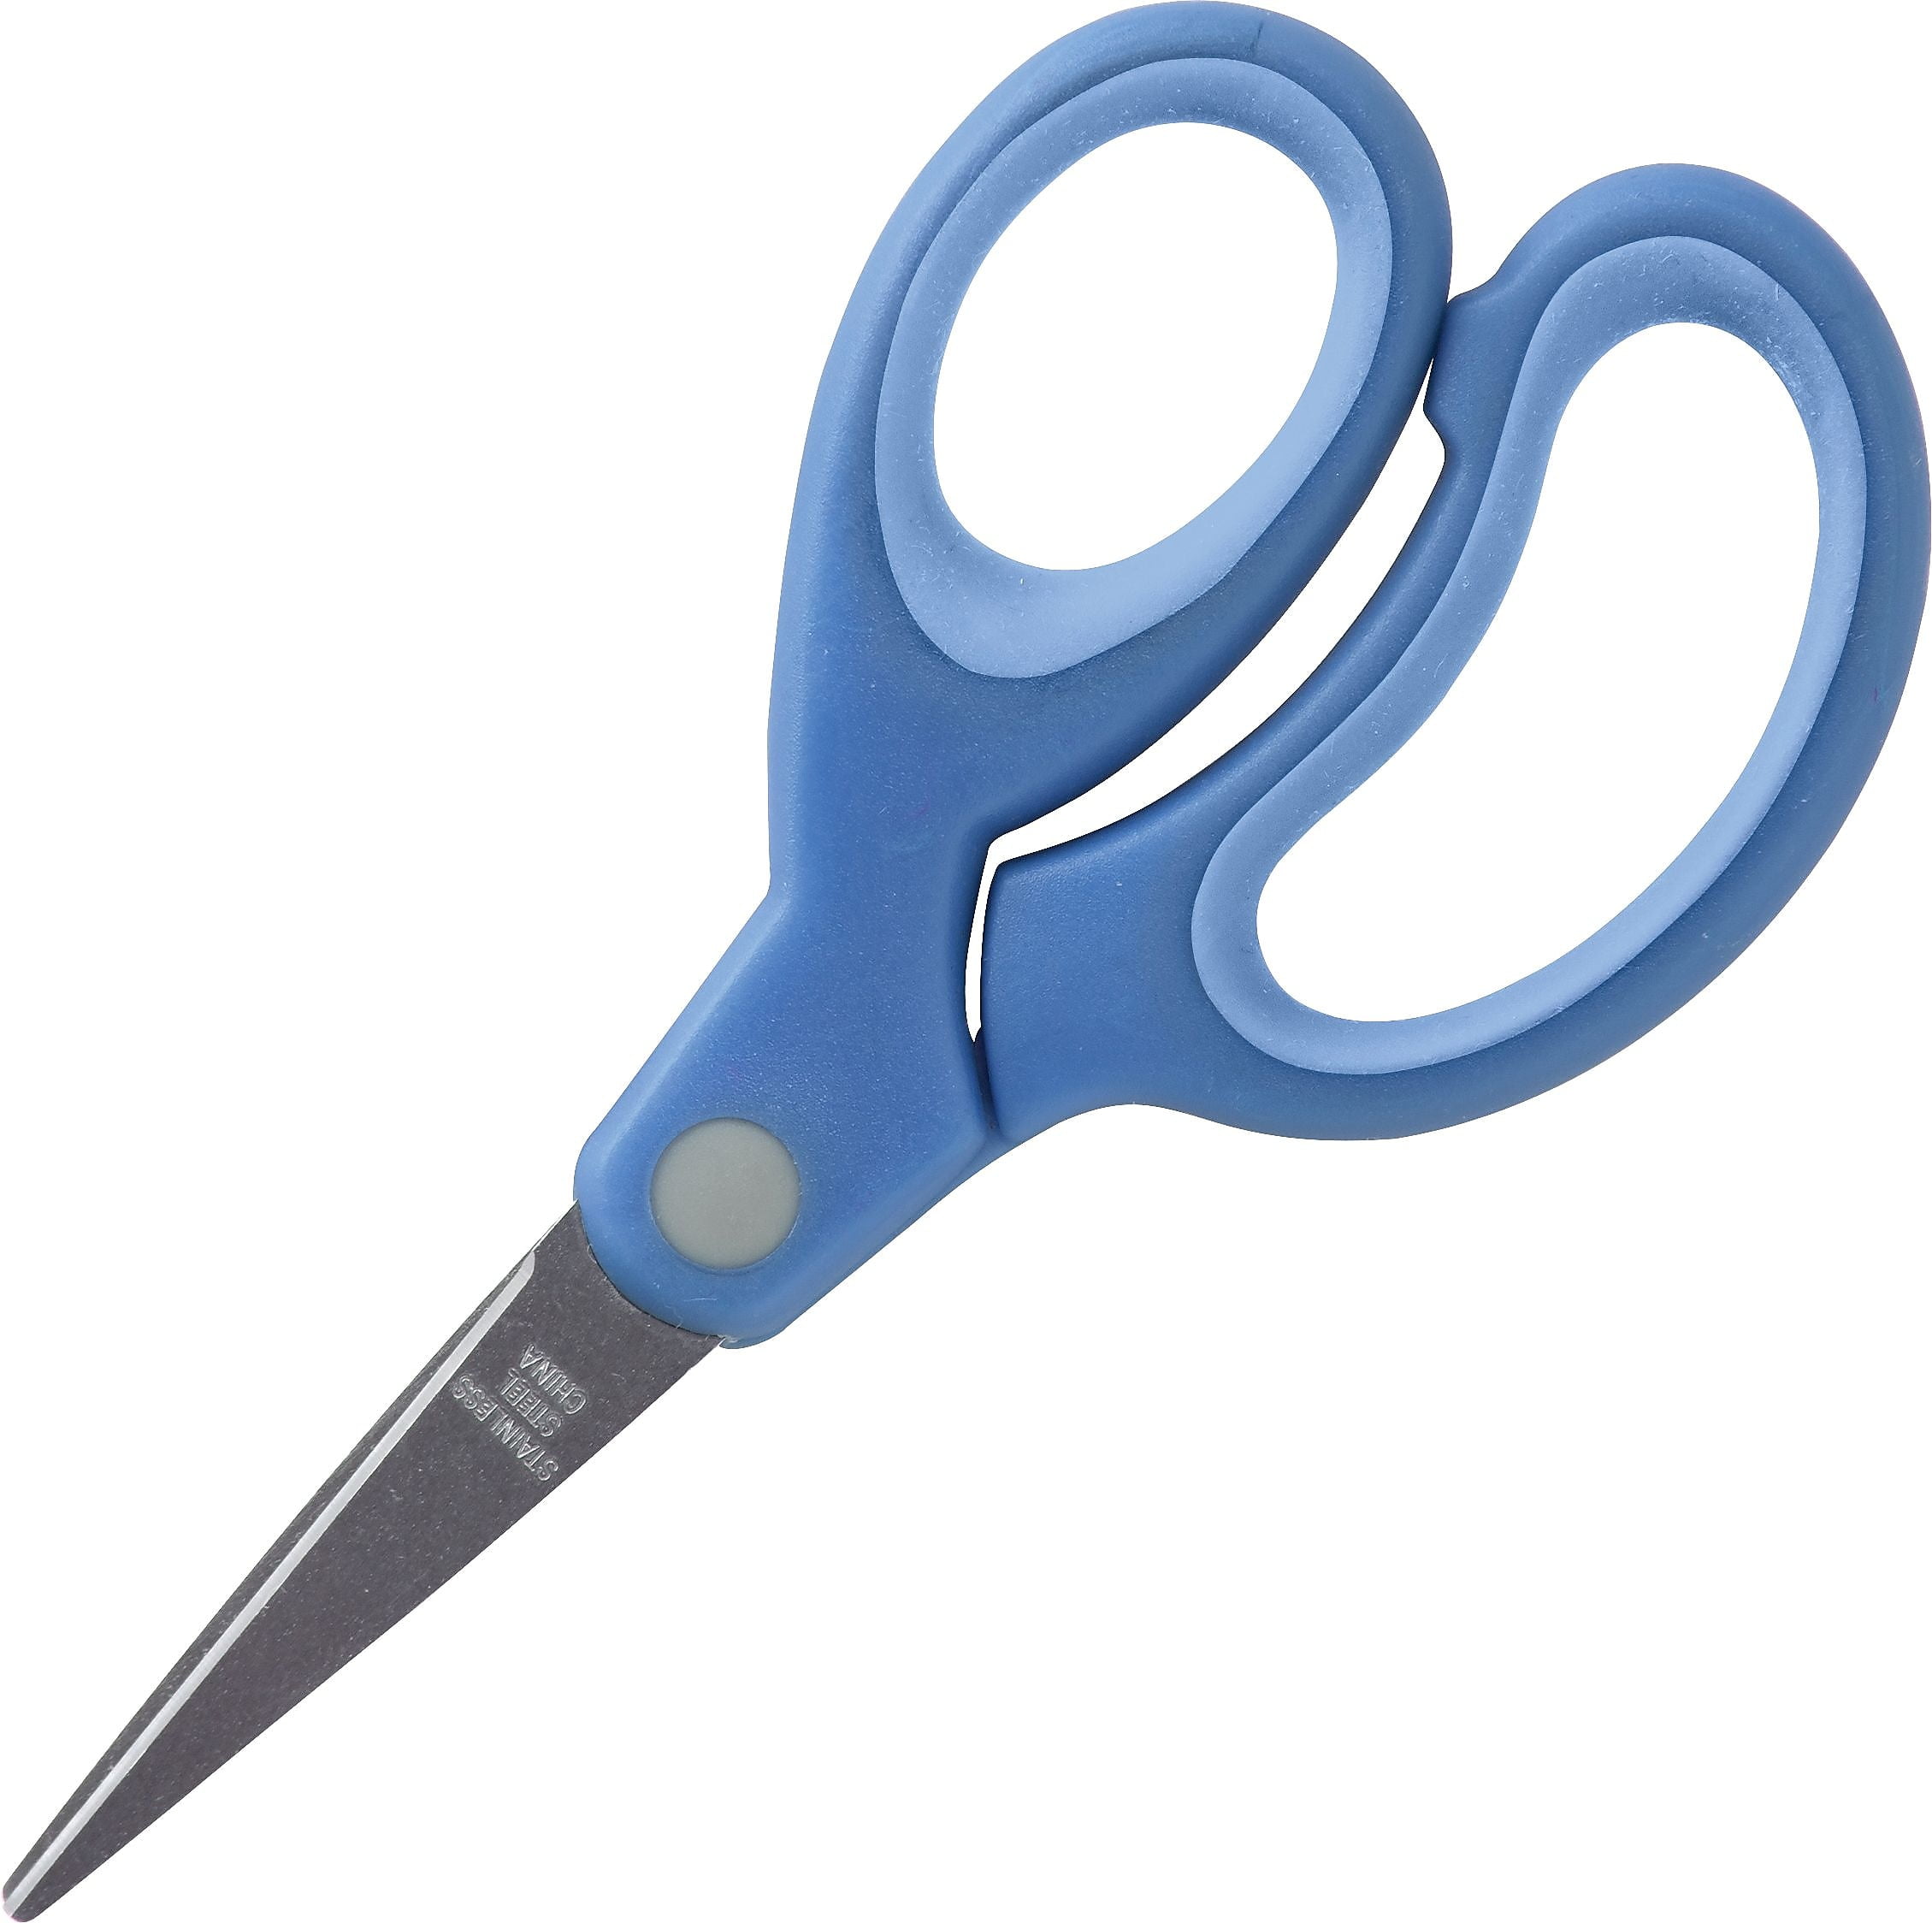 Sparco 5 Kids Pointed End Scissors, Multipack of 12 